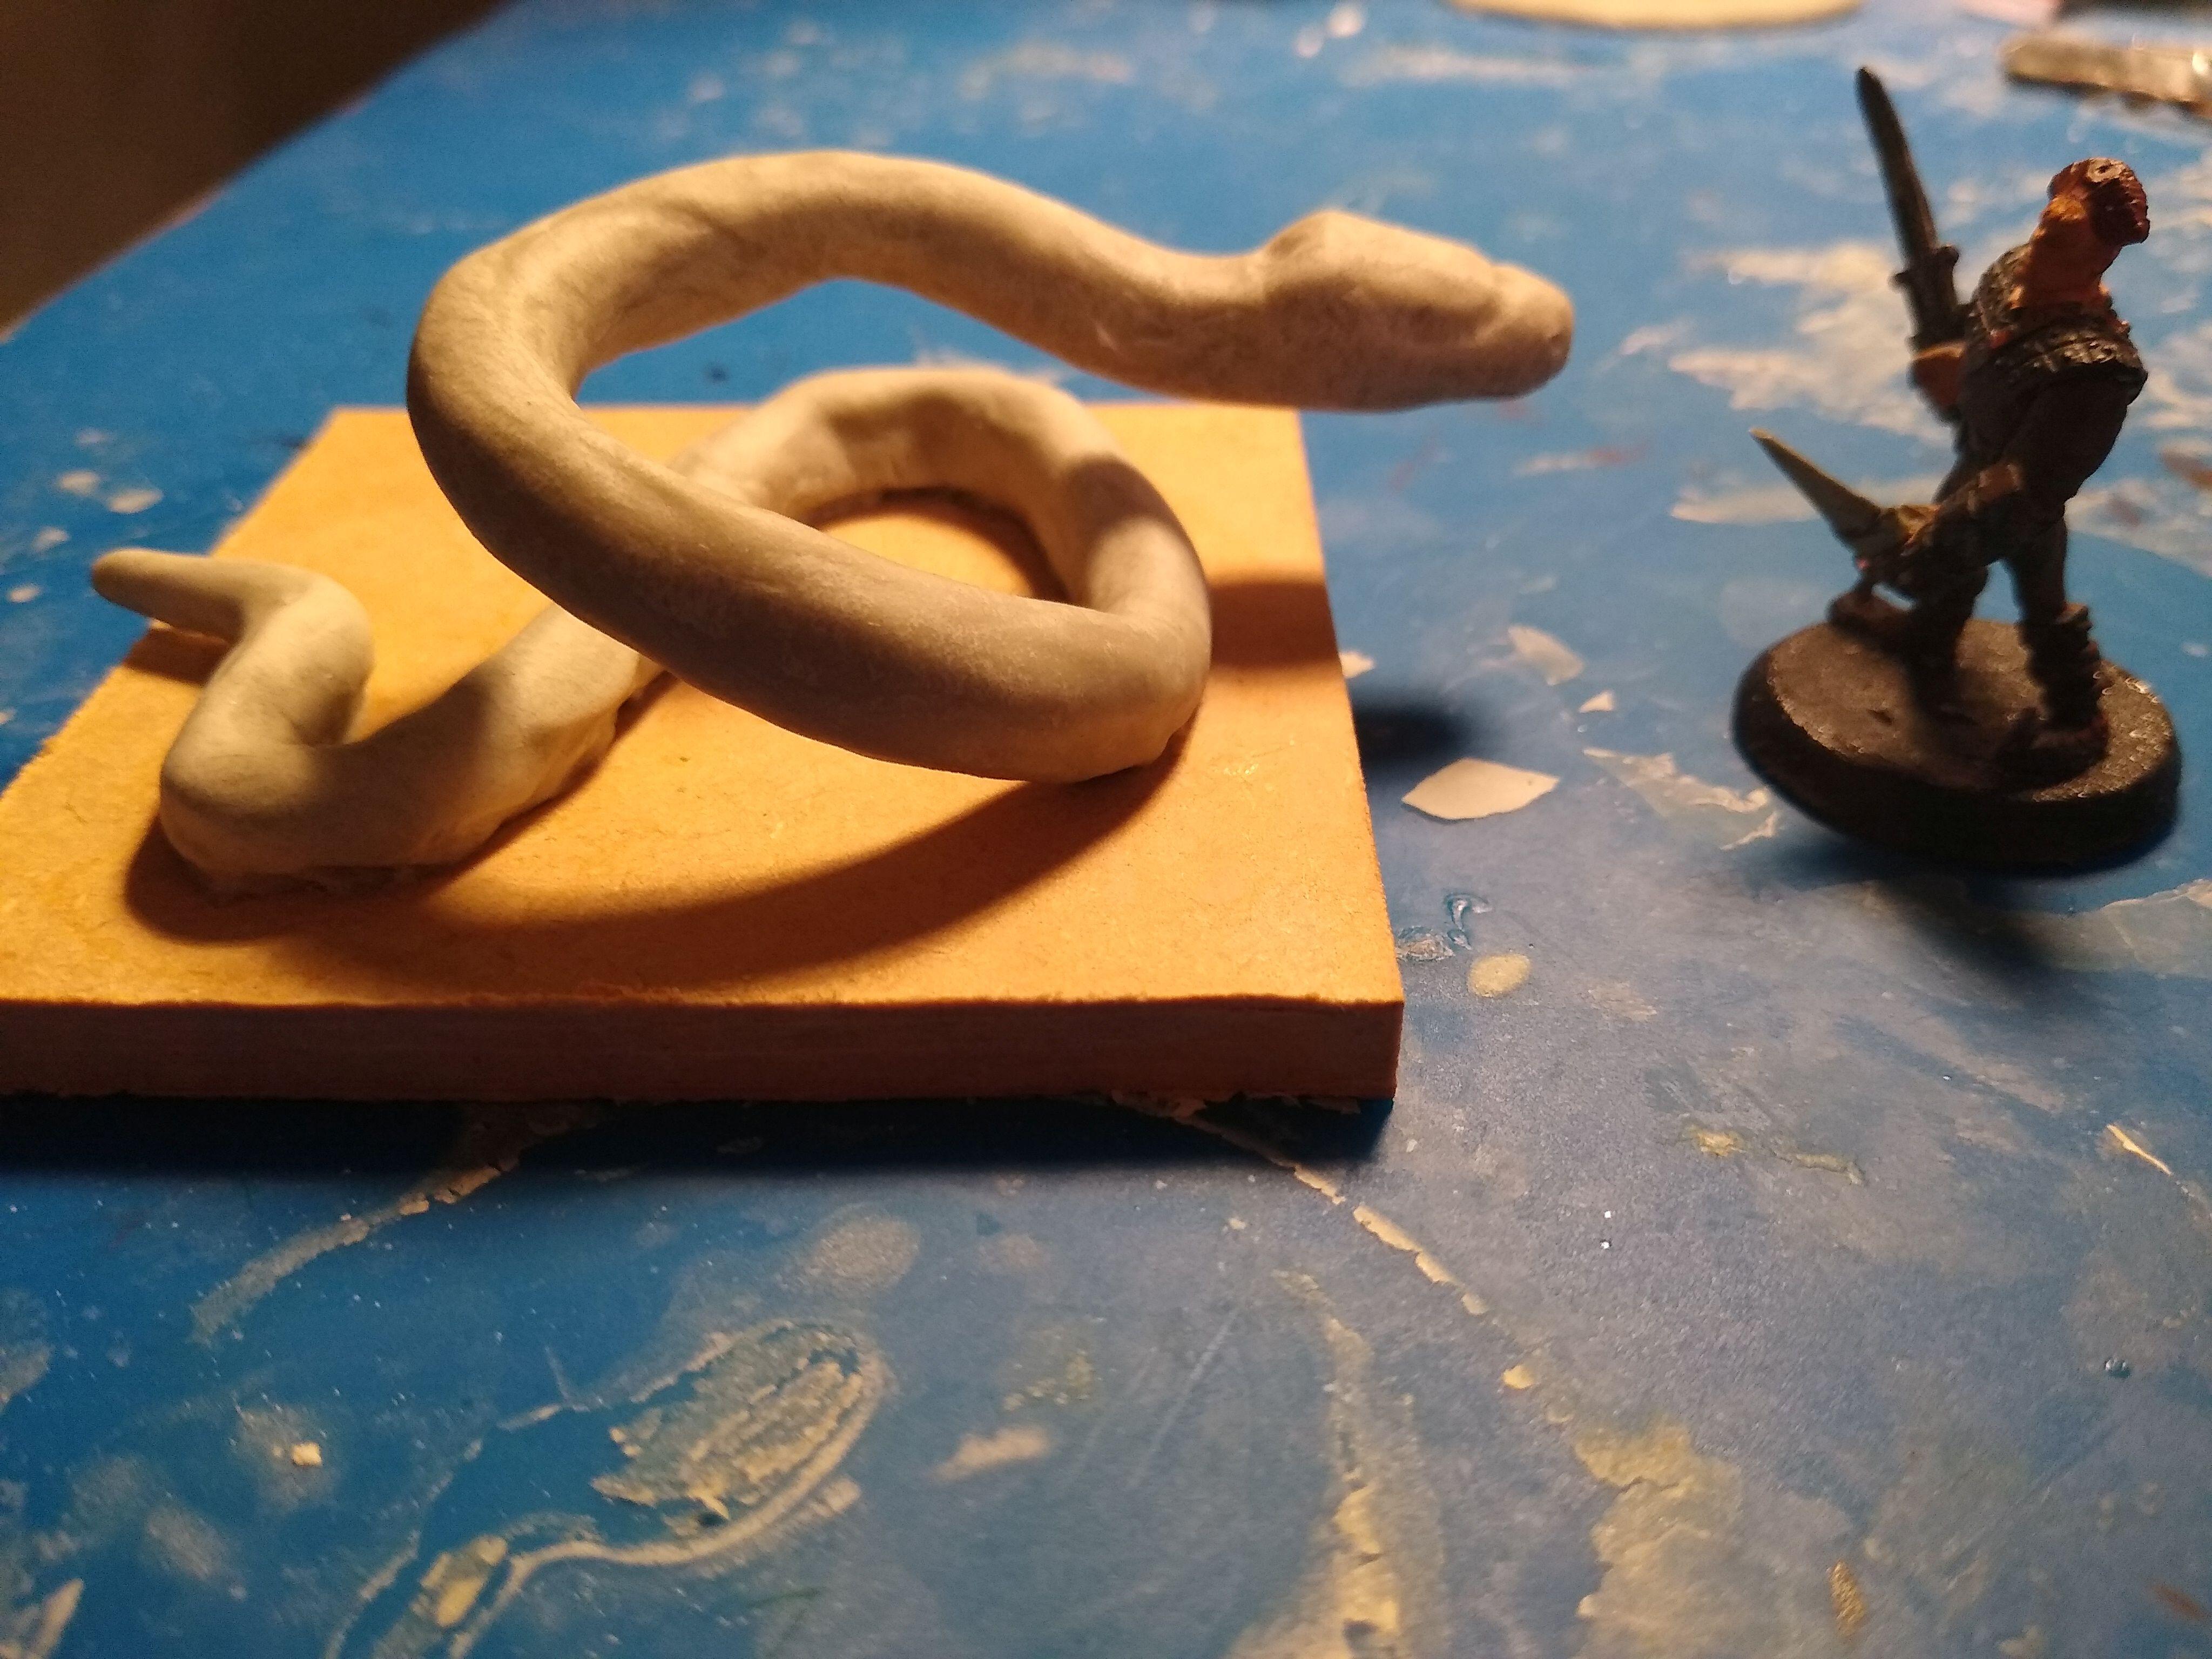 Dragon, Dungeons, Dungeons And Dragons, Mini, Miniature, Monster, Sculpting